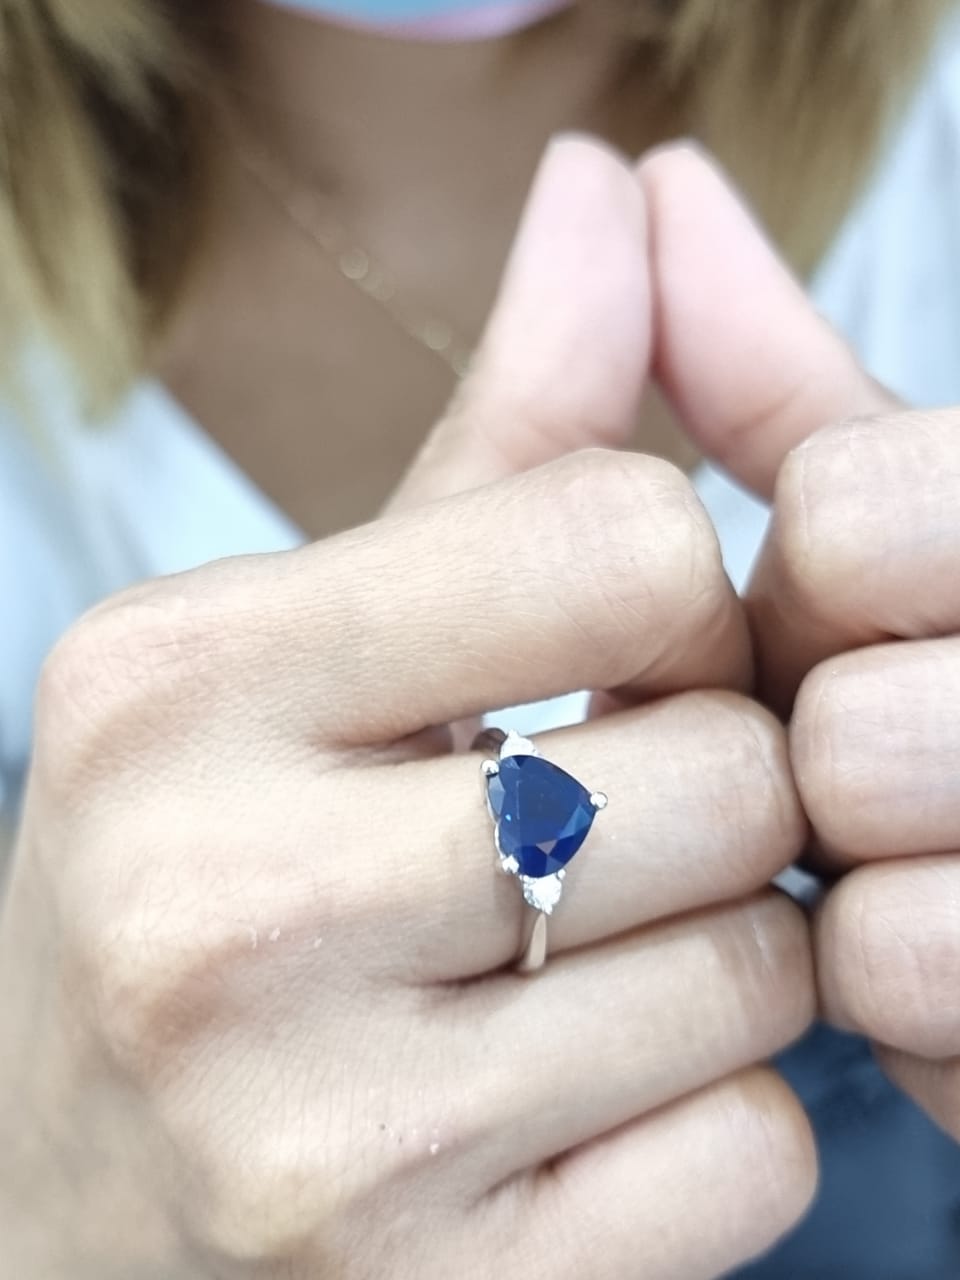 Heart Shape Blue Sapphire And Diamond Ring Crafted  In 18K White Gold